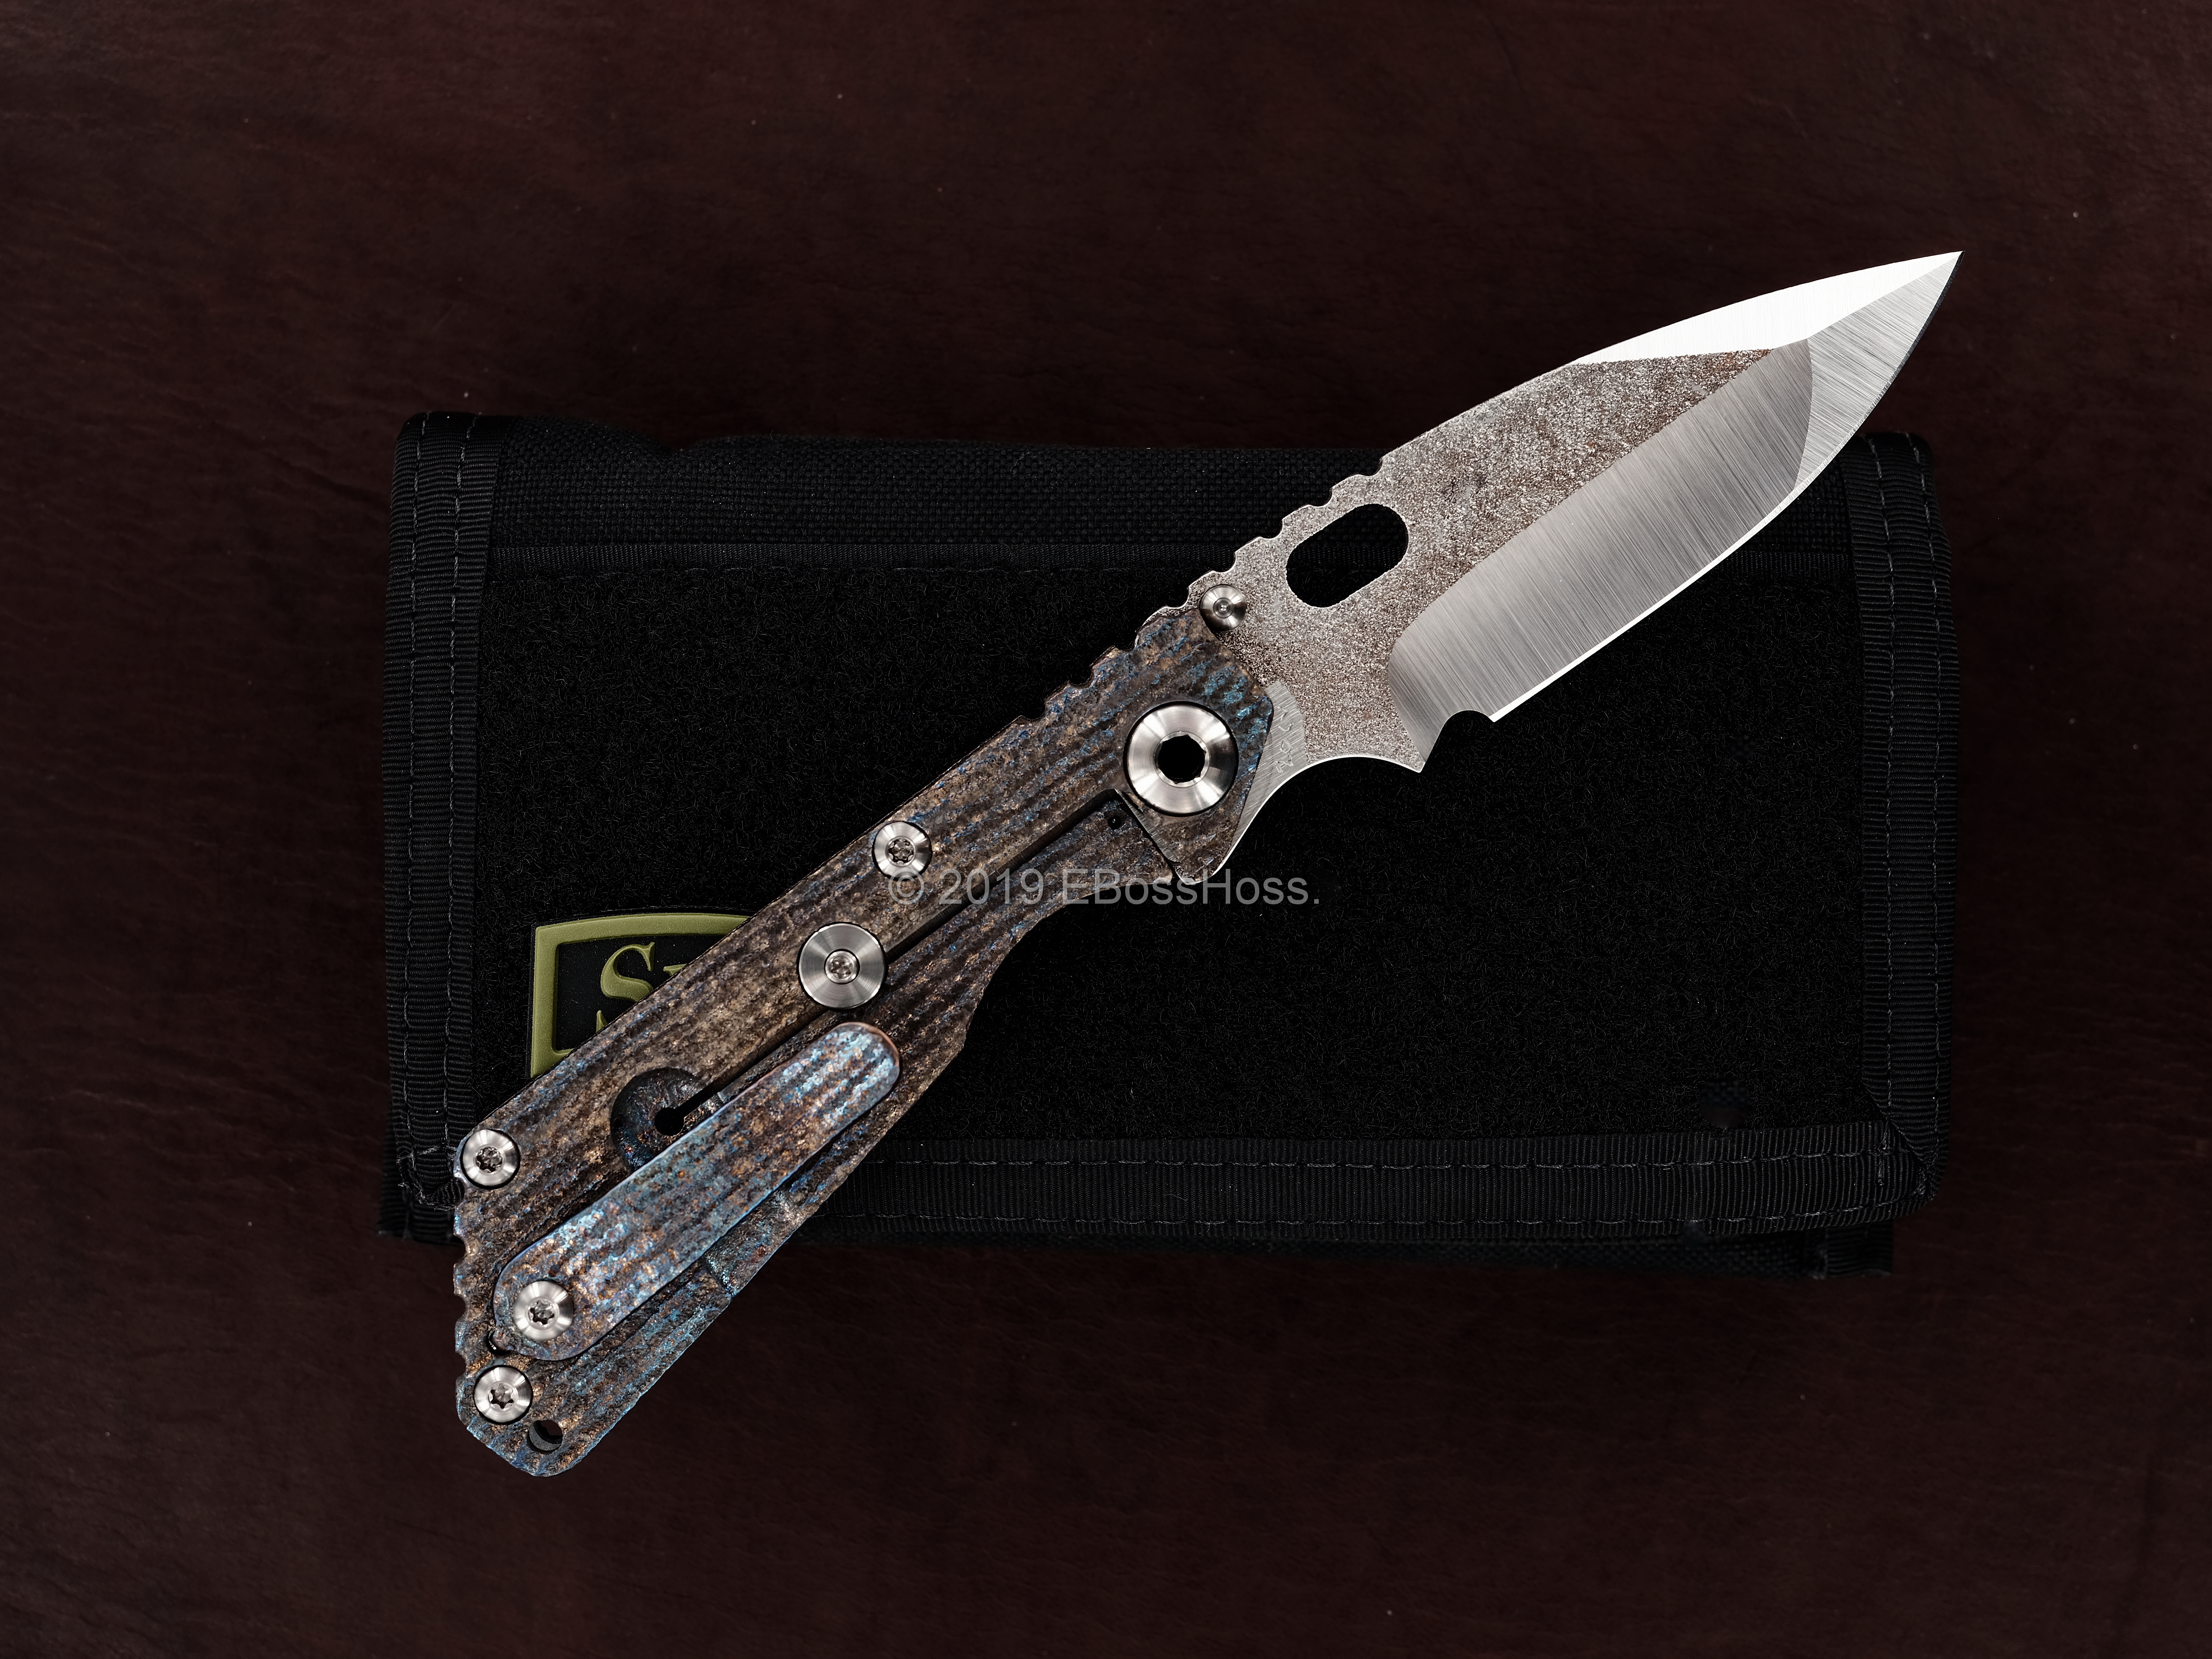 Mick Strider Custom (MSC) Nightmare SnG - Exceptional Groot-texturing by Forest Strider